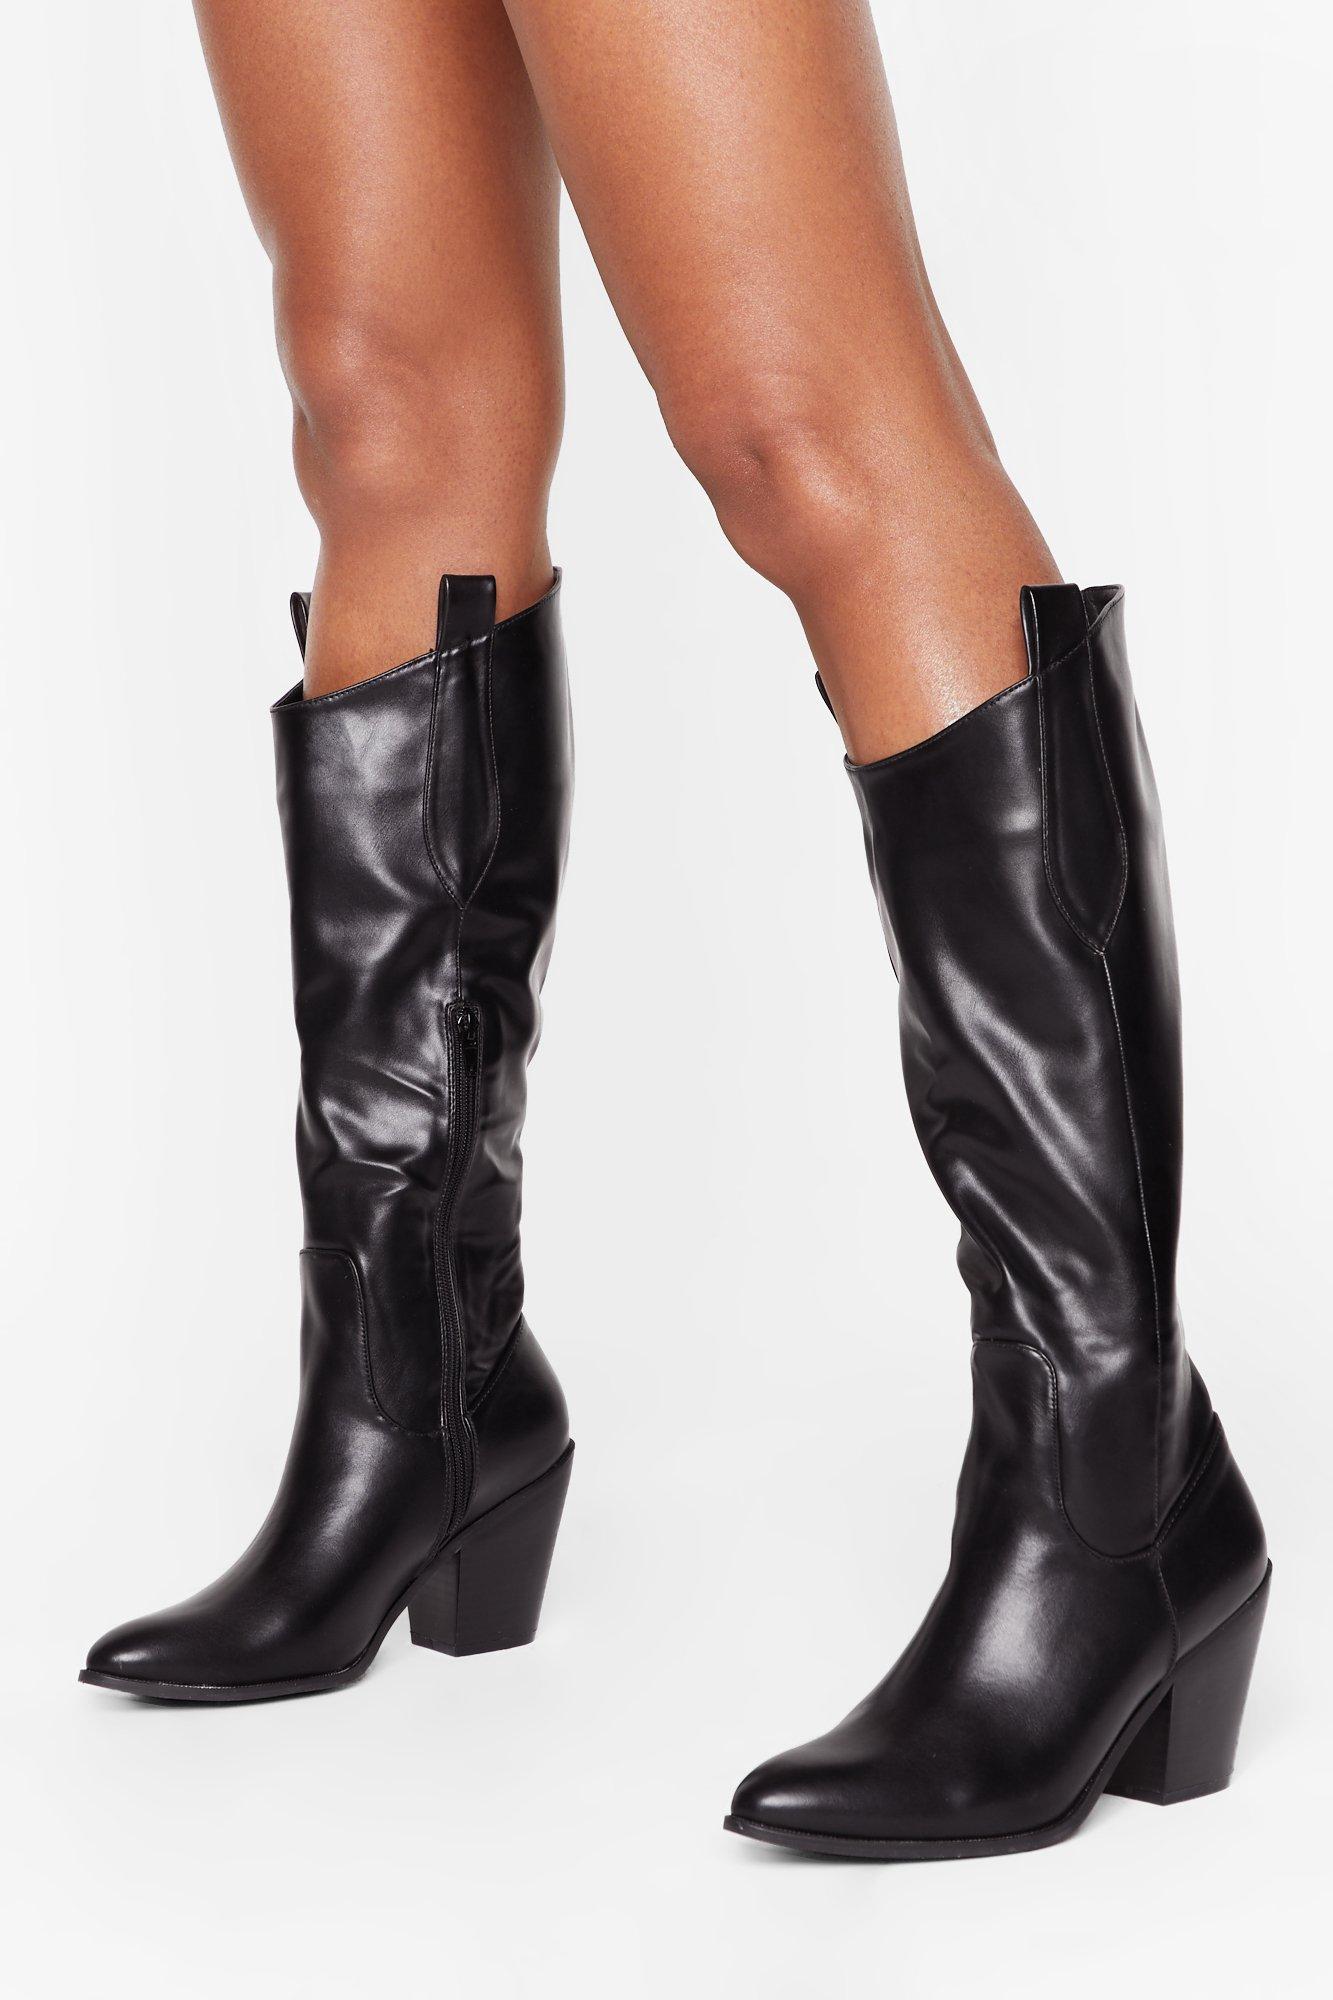 western boots knee high